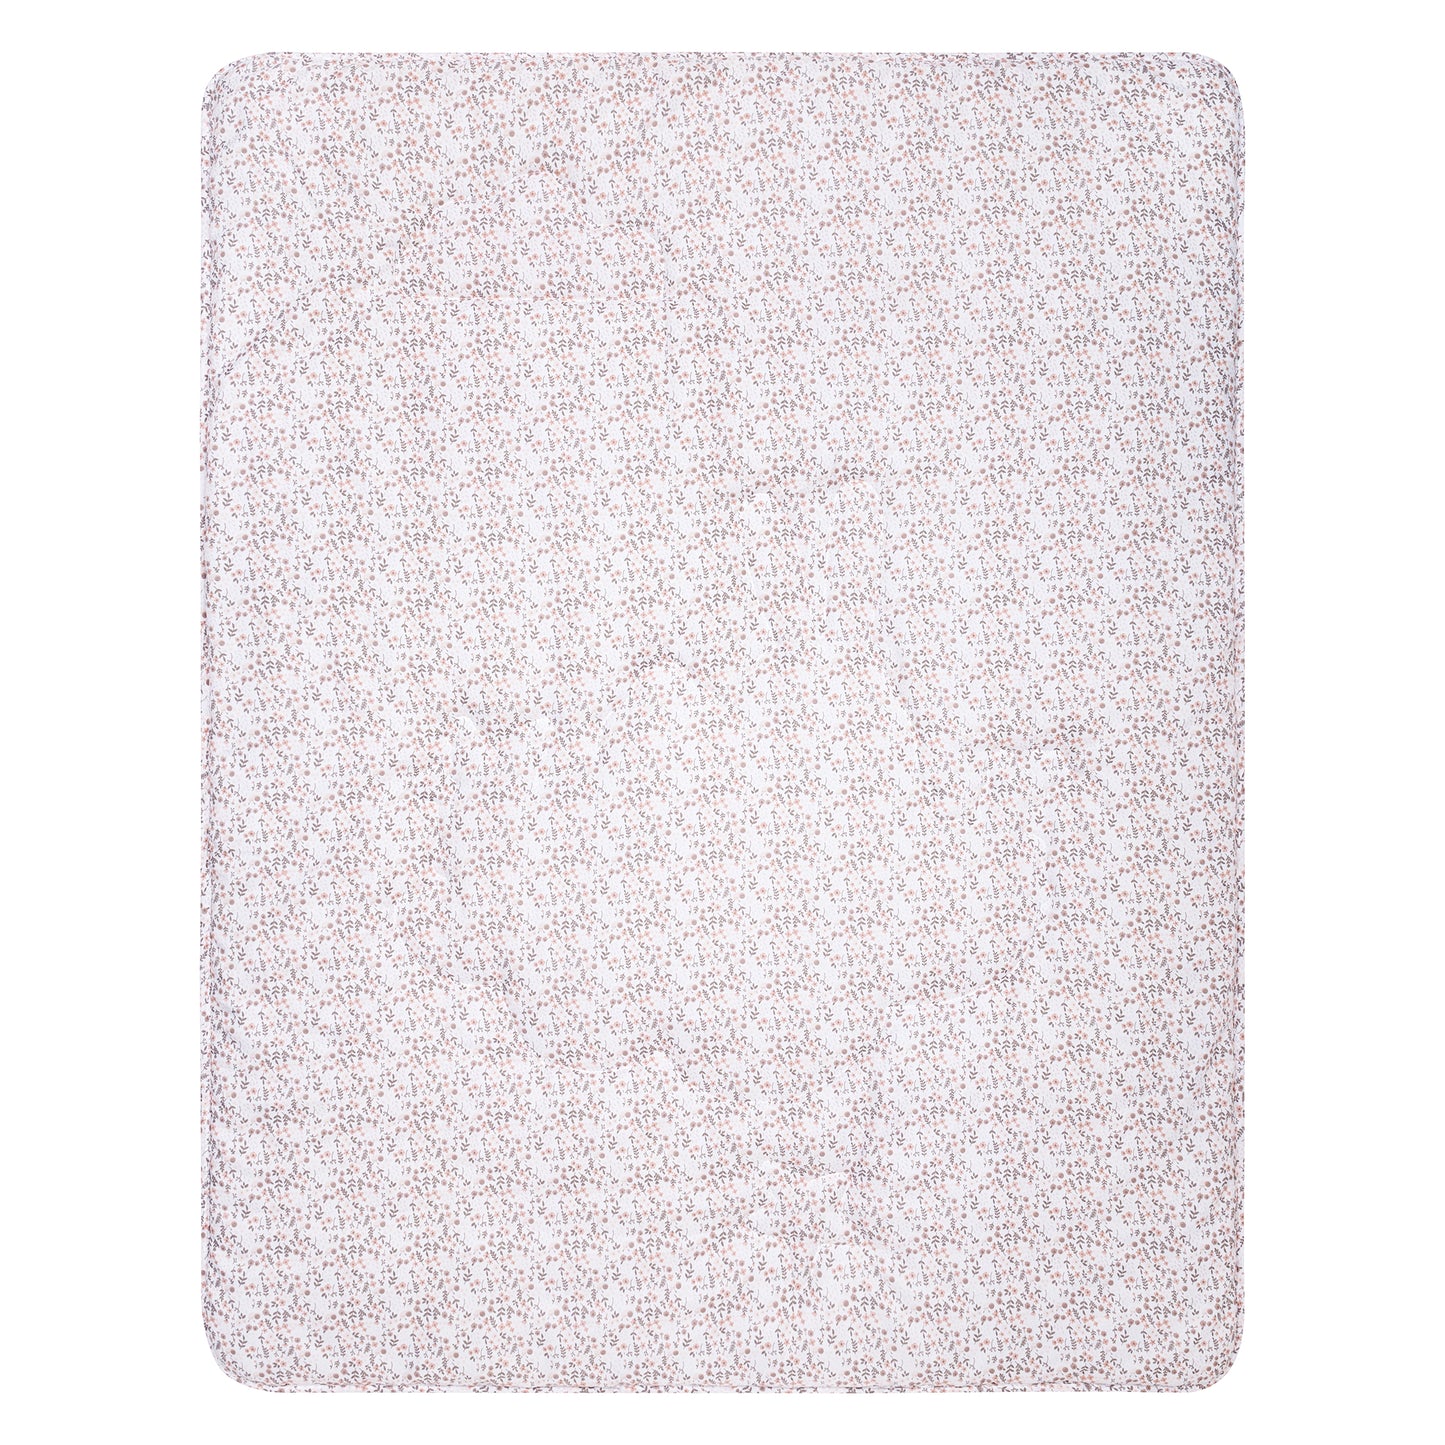 Nursery Crib Quilt Features an adorable bunny rests among the clouds and stars which are accented by floral and dot prints in a soft color palette of soft pinks and gray on a clean white background. 